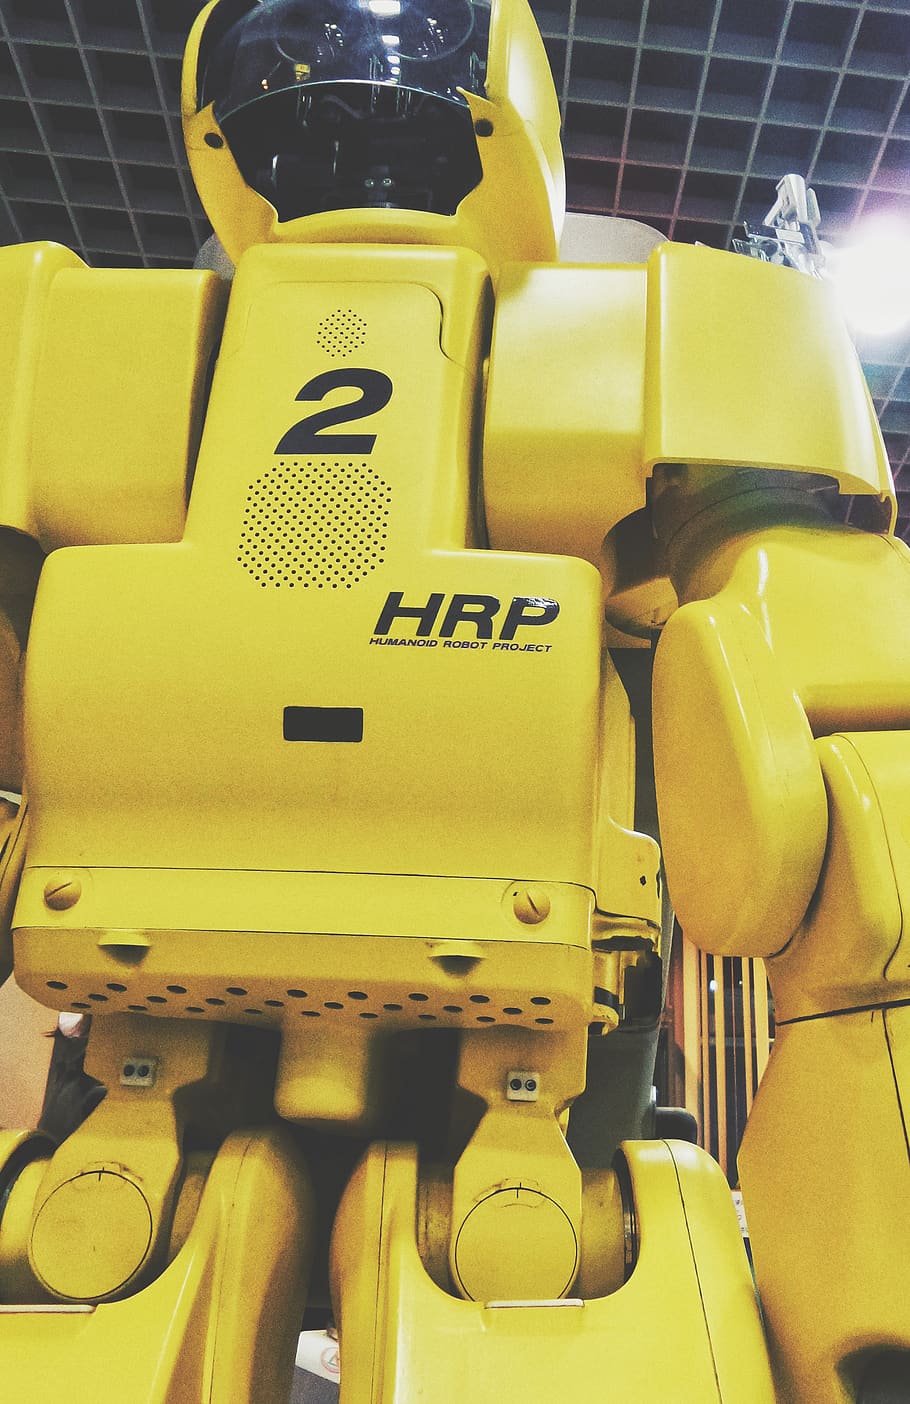 375x667px. free download. HD wallpaper: robot, android, hrp